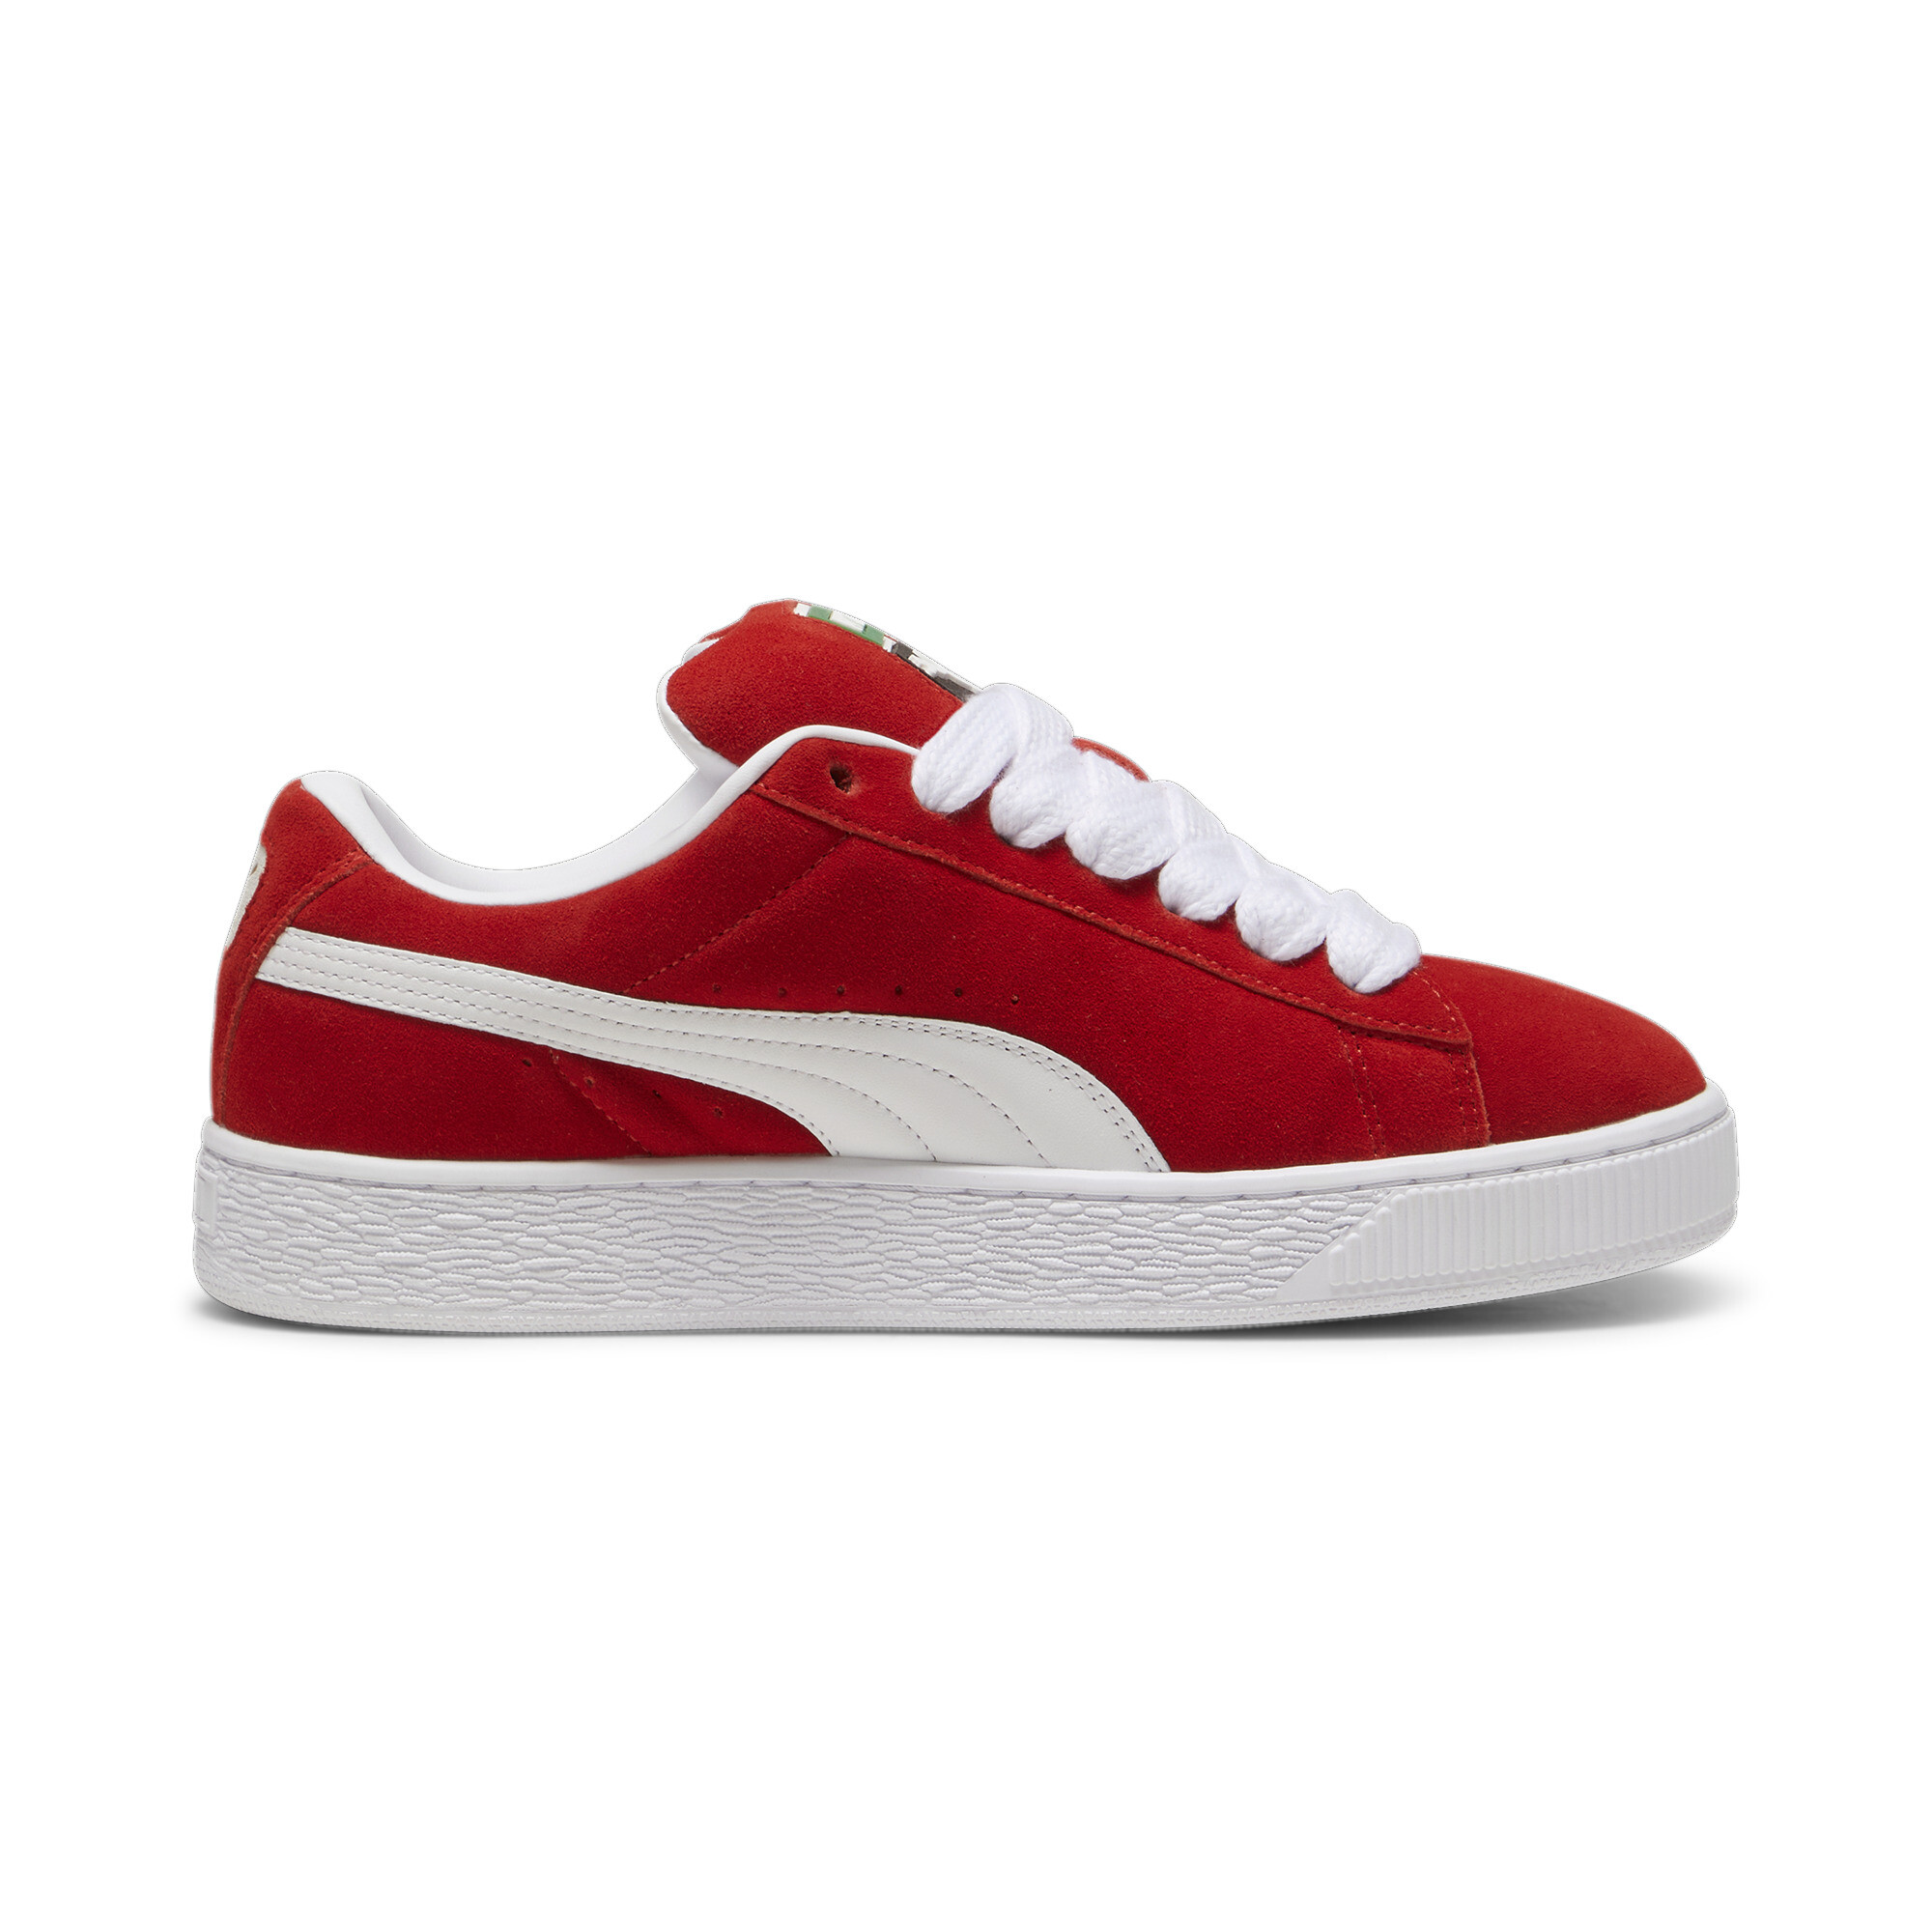 Puma Suede XL Sneakers Unisex, Red, Size 37.5, Shoes